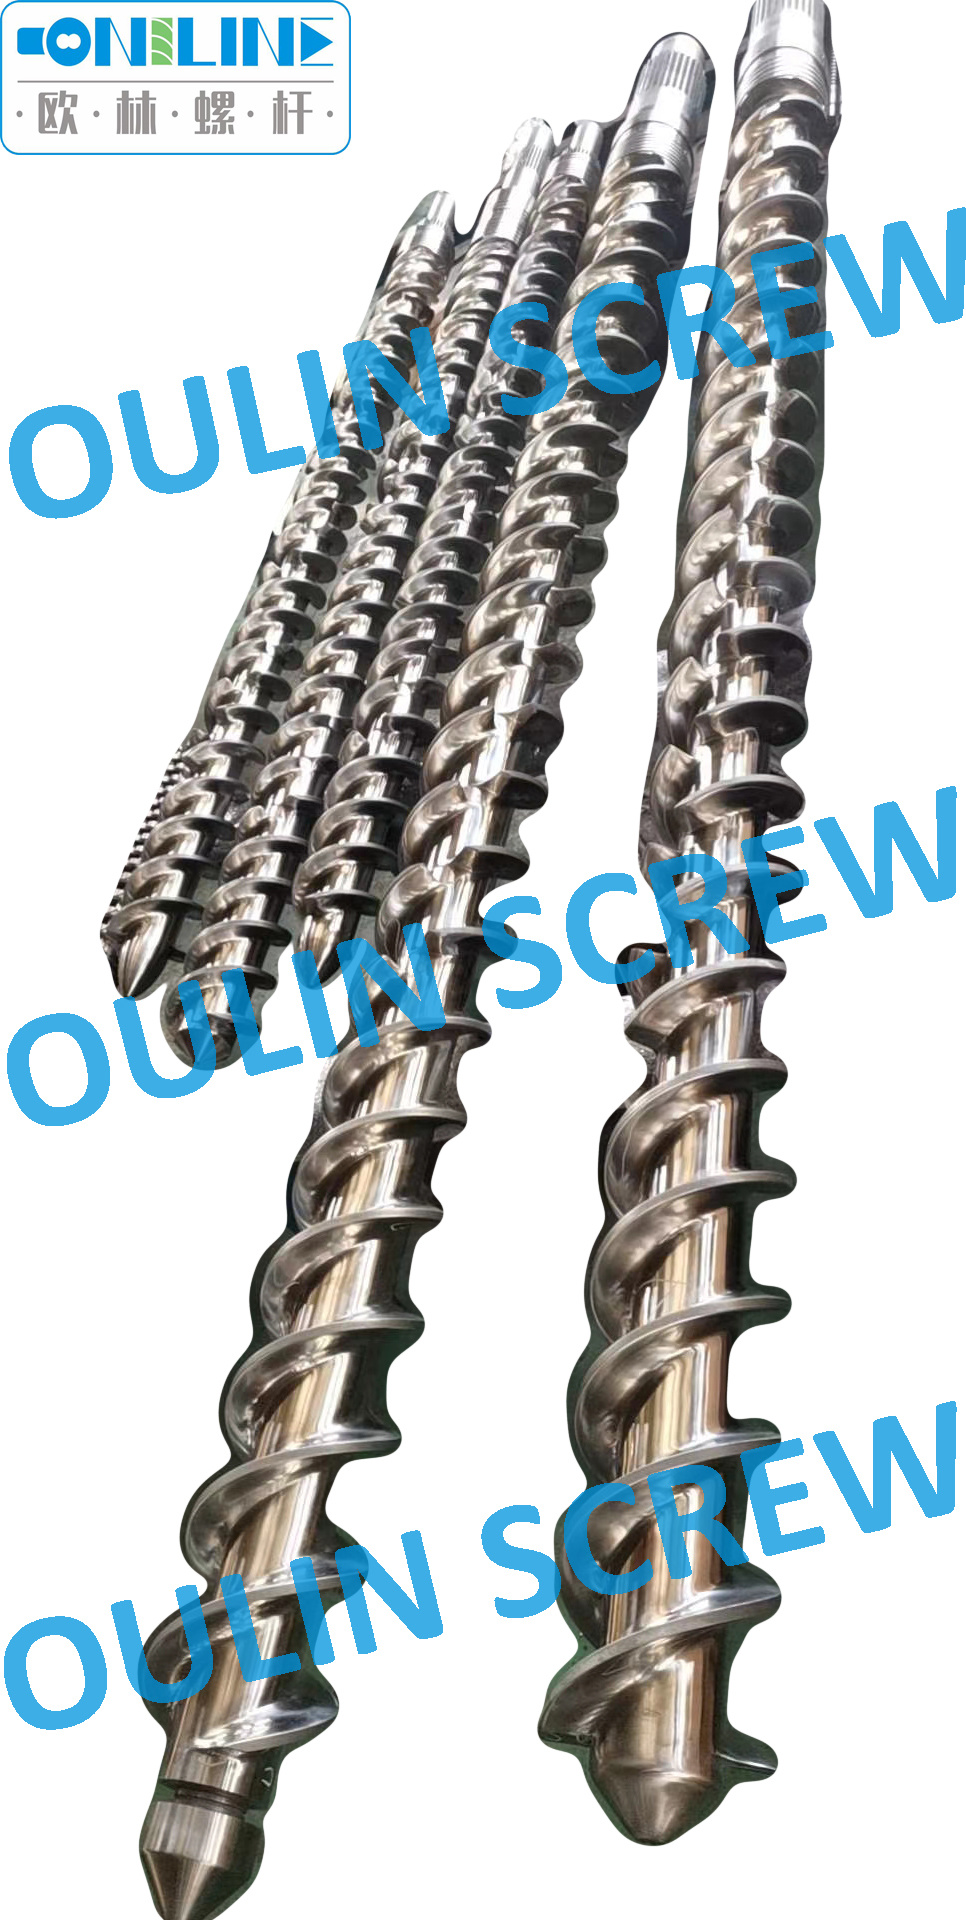 rubber extruder screw and barrel